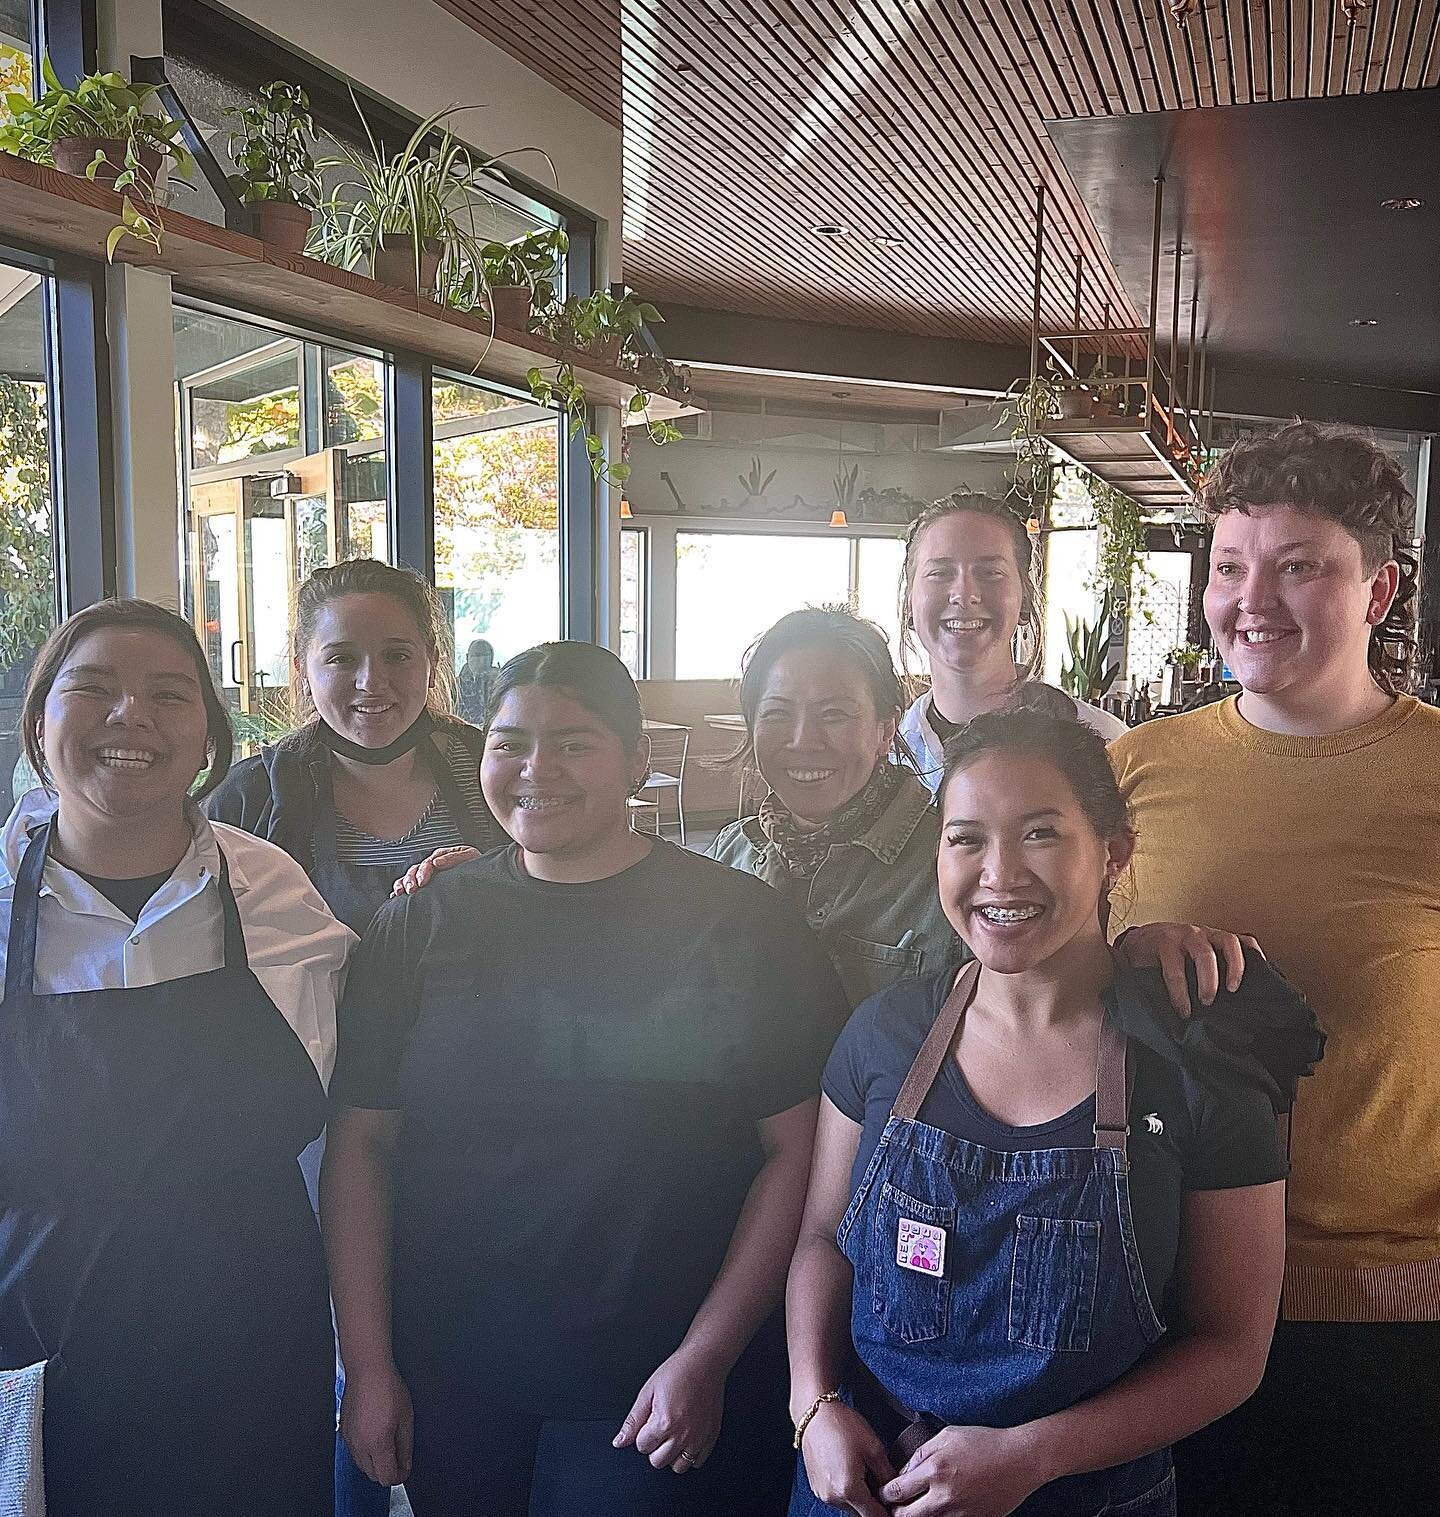 Often underrepresented in the kitchen, we dominated in numbers this day&mdash; from Manager, cooks, dishwasher, bartender, and chef/owner&mdash; we are doing our best repping #women.  #womanownedbusiness #womenpowered #womenoperated